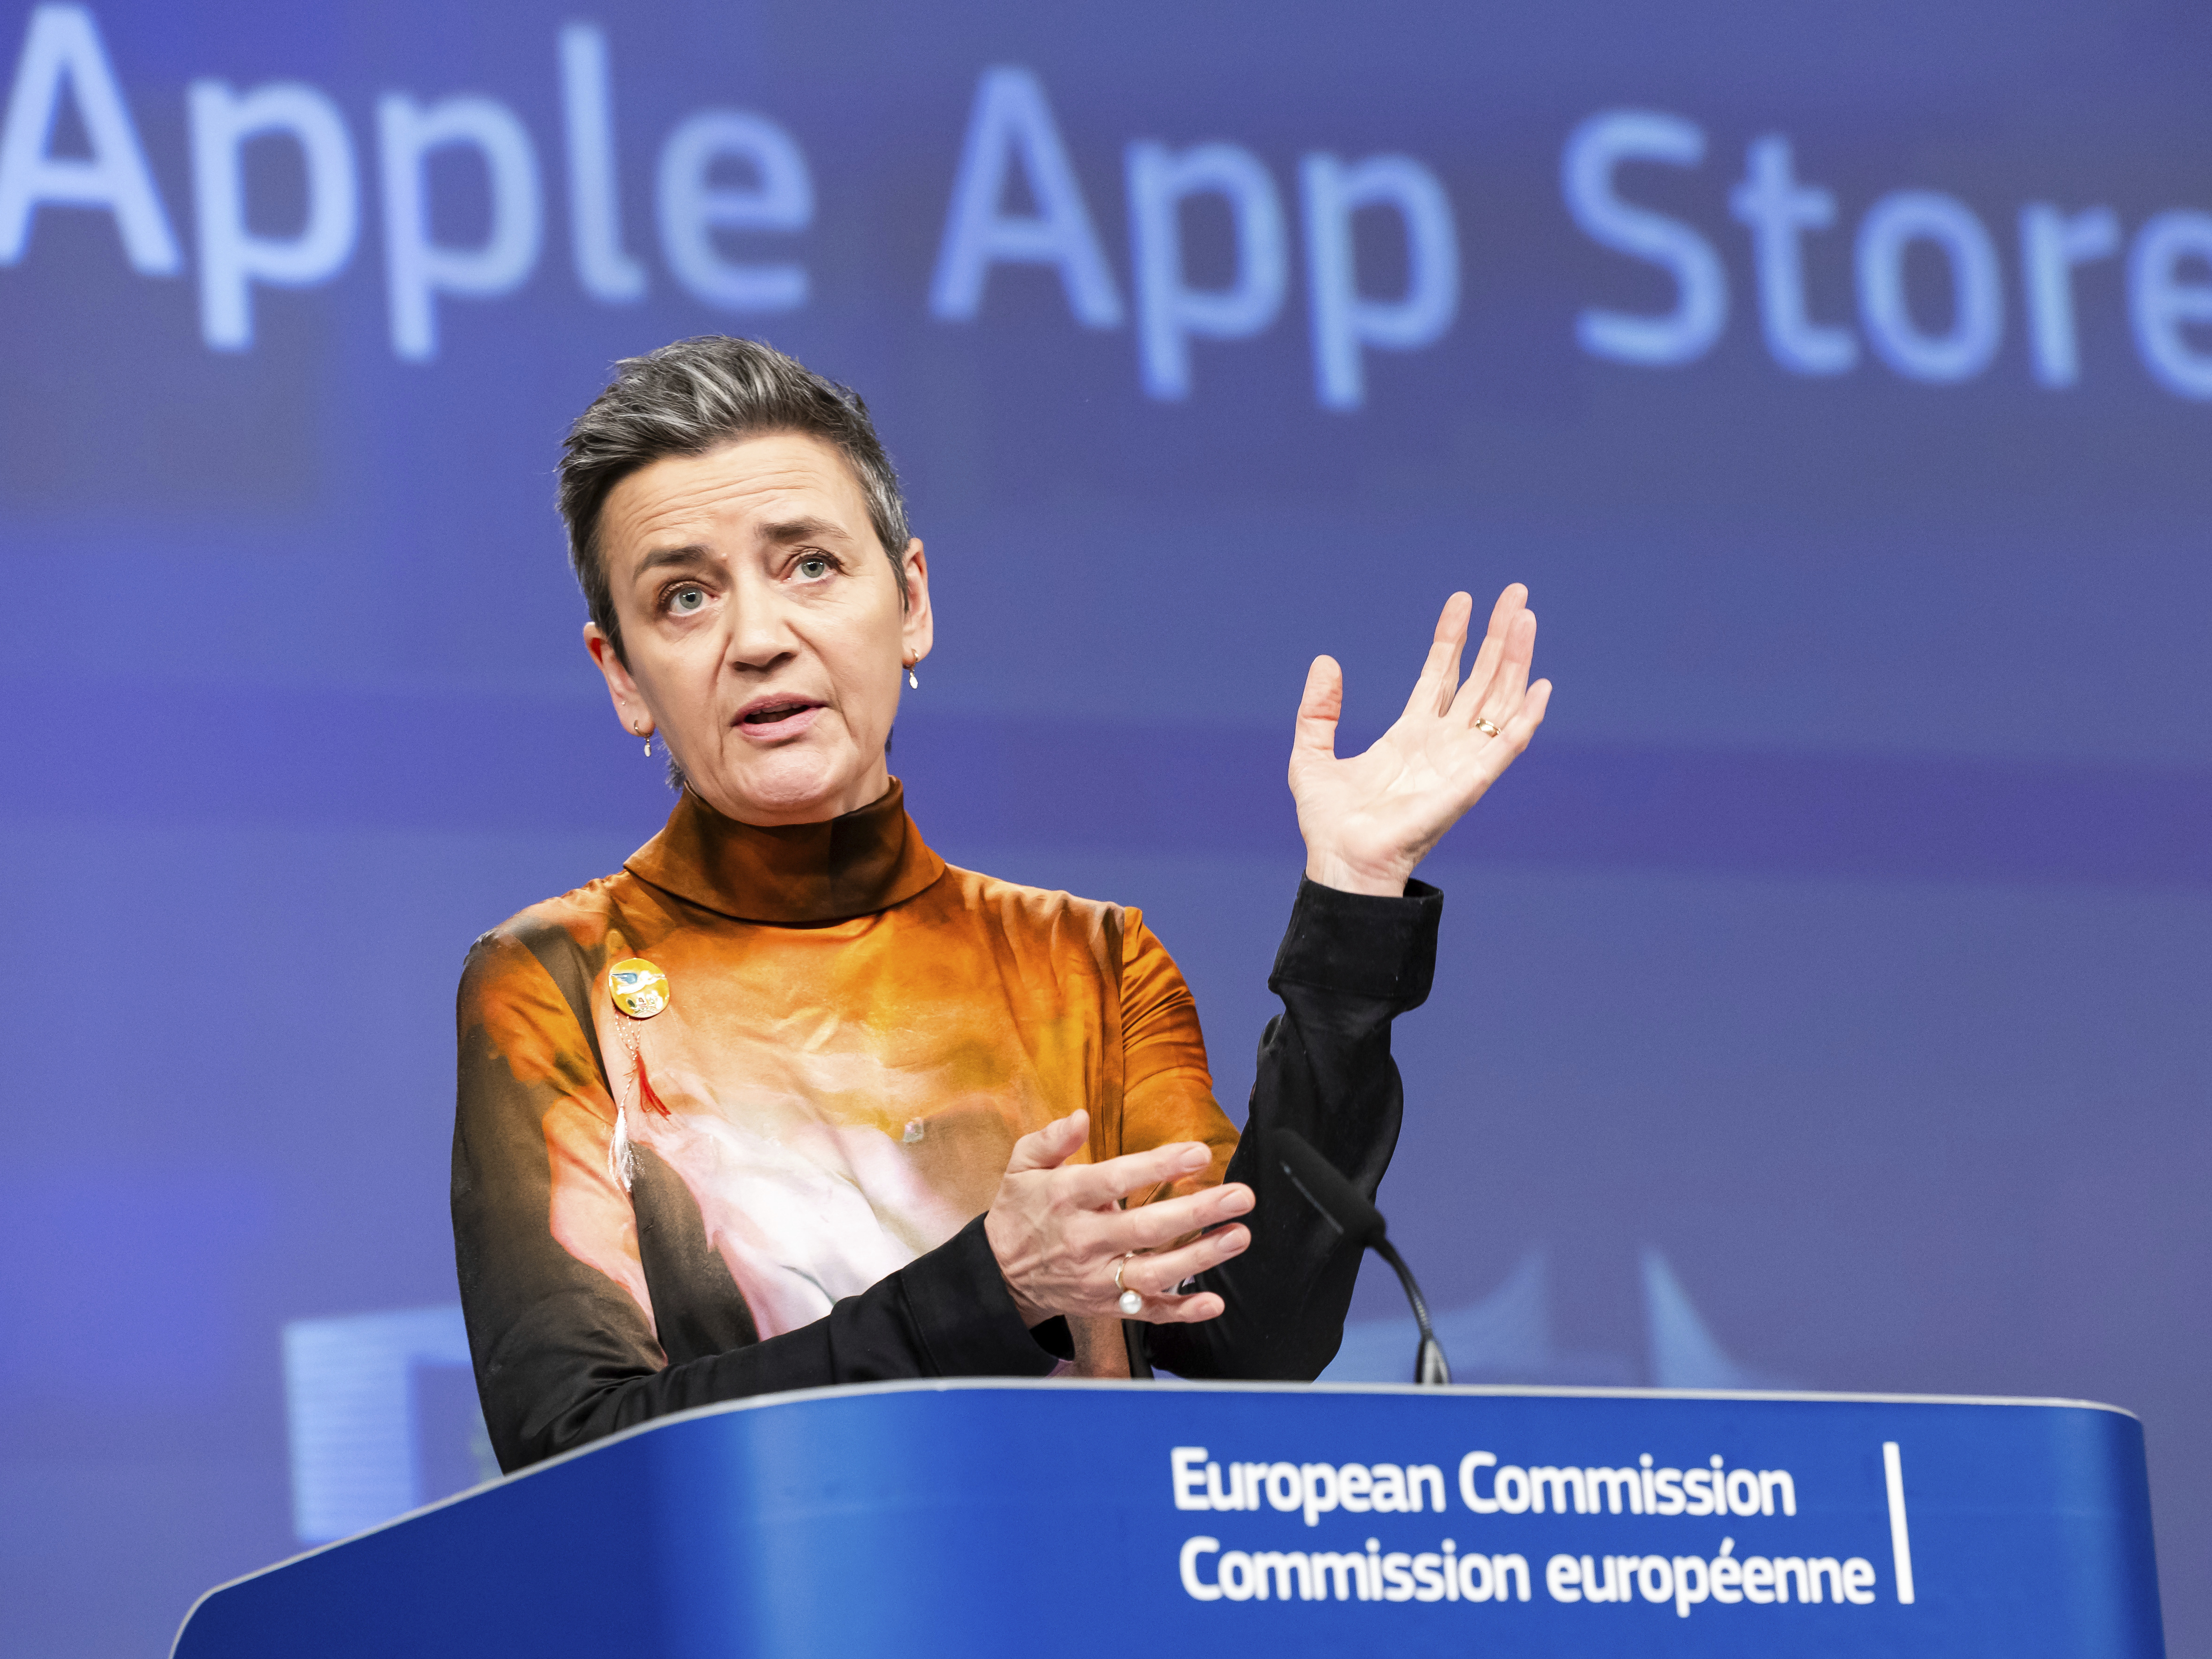 EU Commission vice president Margrethe Vestager addresses the media about Apple Music streaming services at EU headquarters in Brussels on Monday.